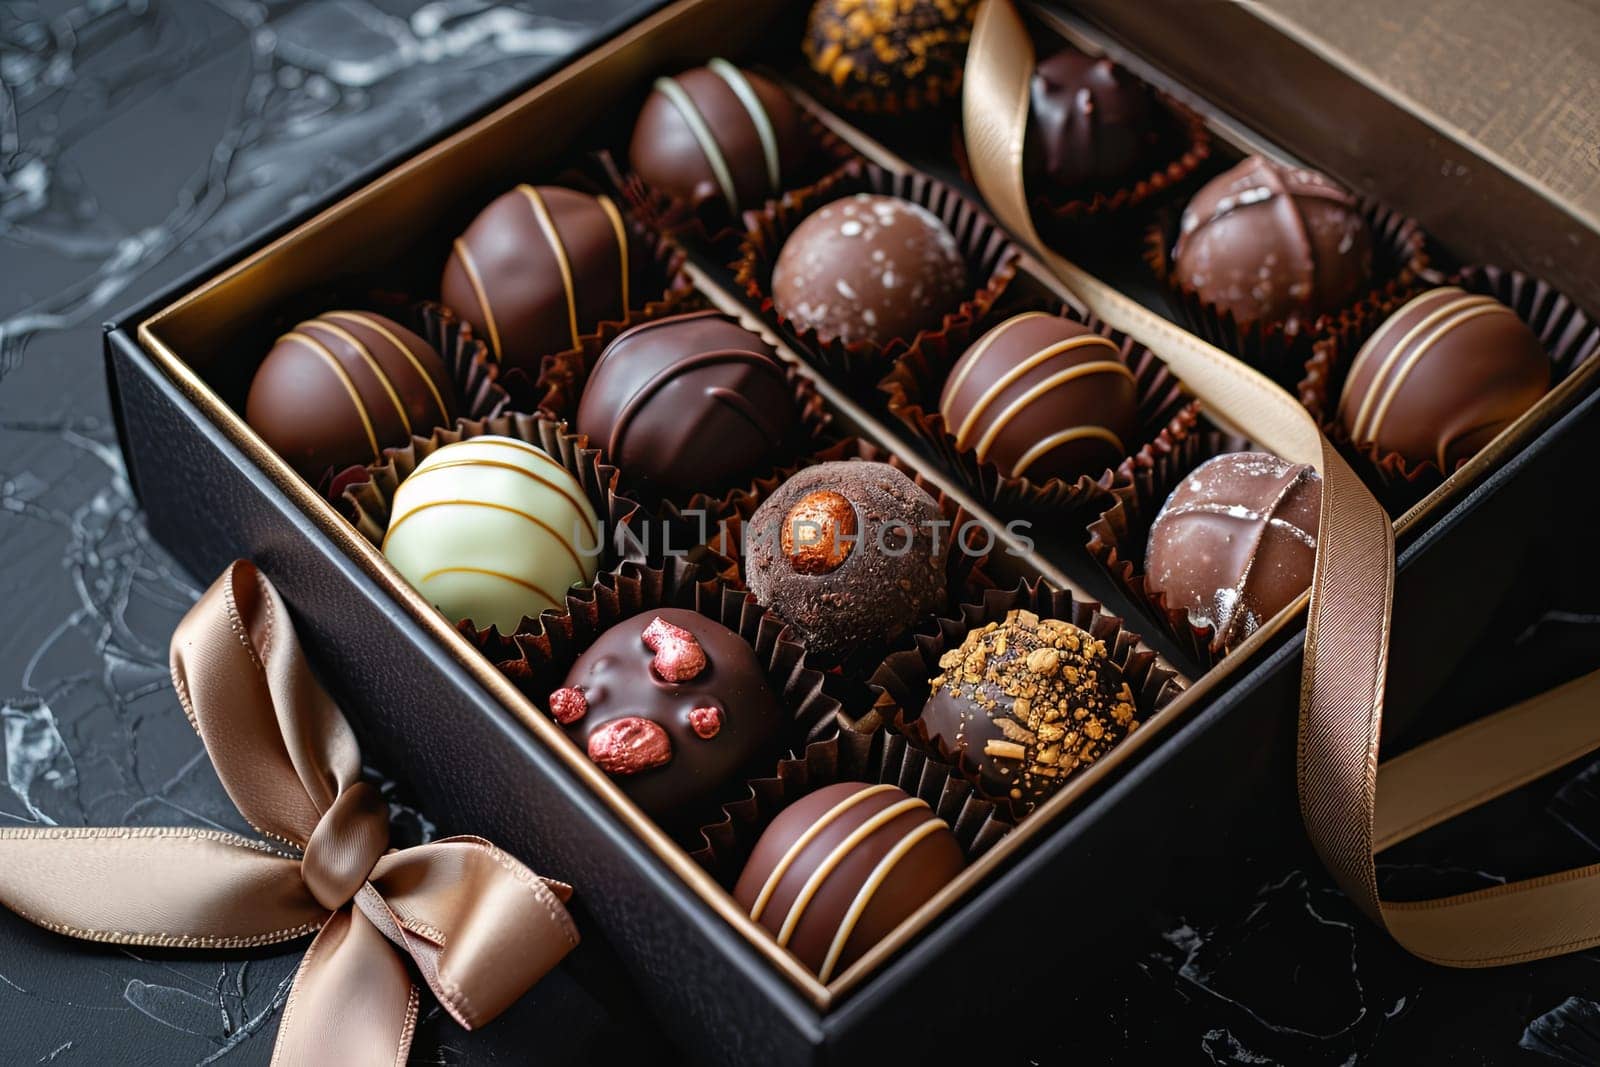 A luxurious box of assorted chocolates, elegantly decorated, placed on a table.